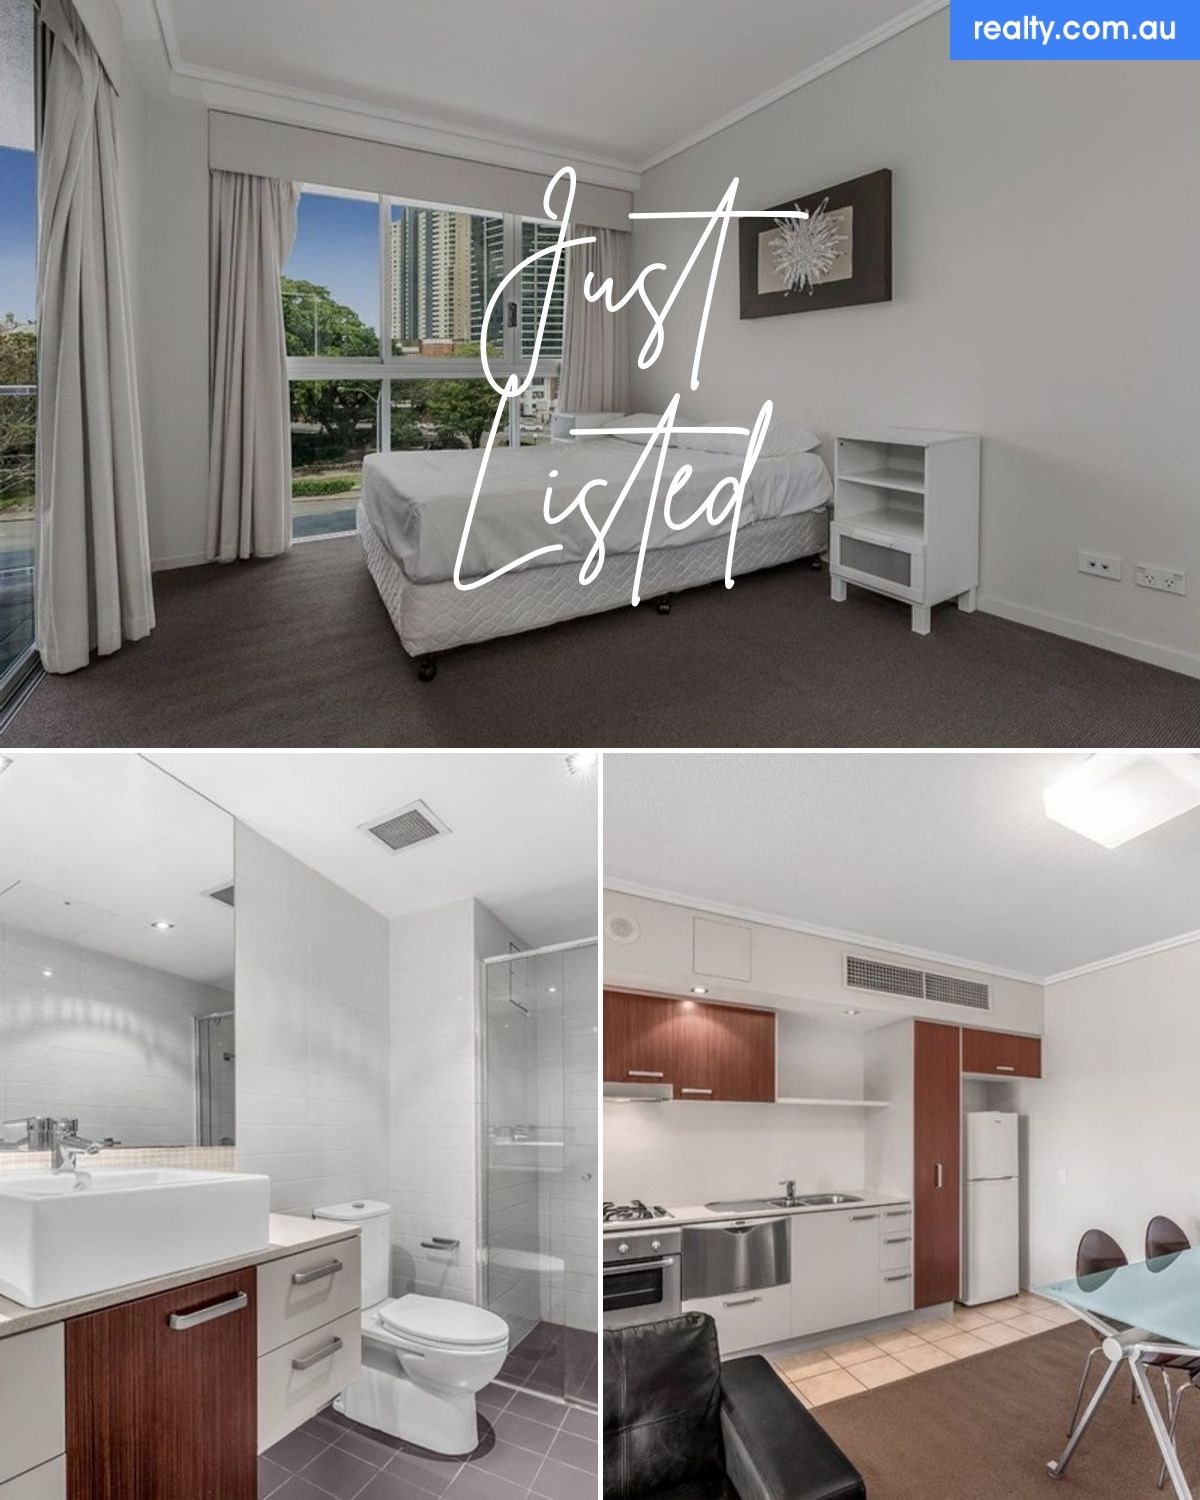 25/22 Barry Parade, Fortitude Valley, QLD 4006 | Realty.com.au